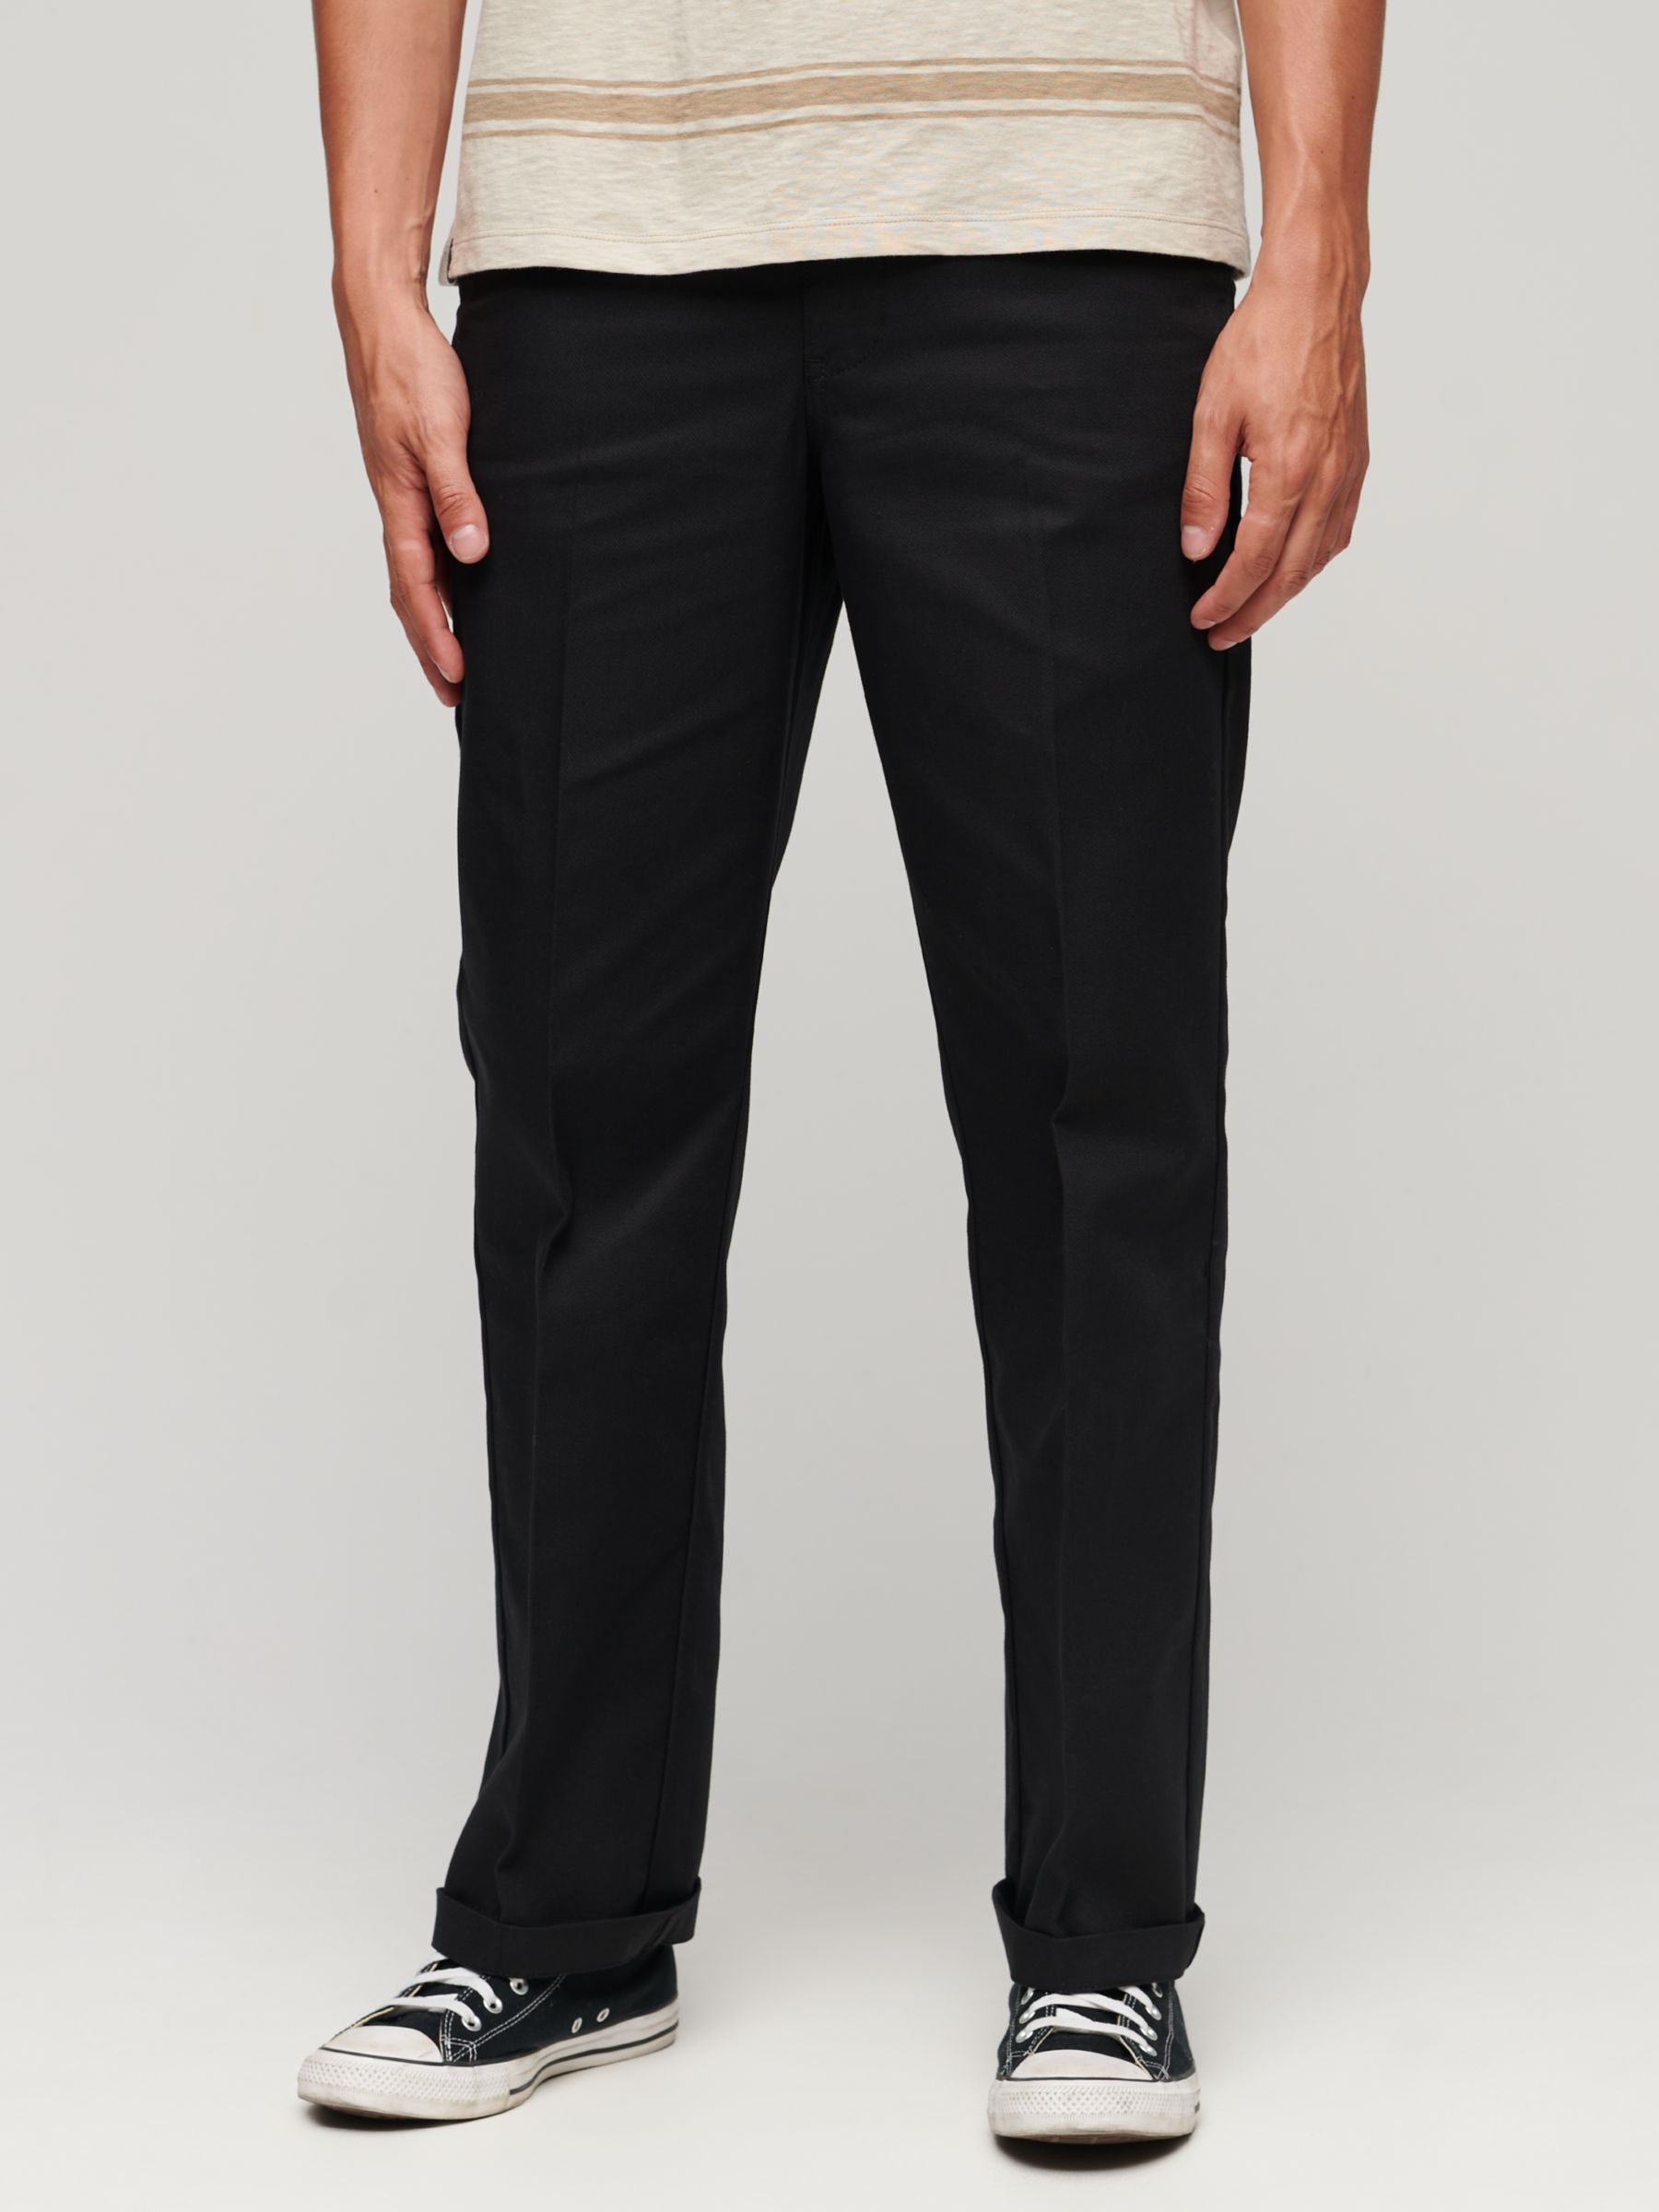 Superdry Straight Chino Trousers, Black, W28/L32